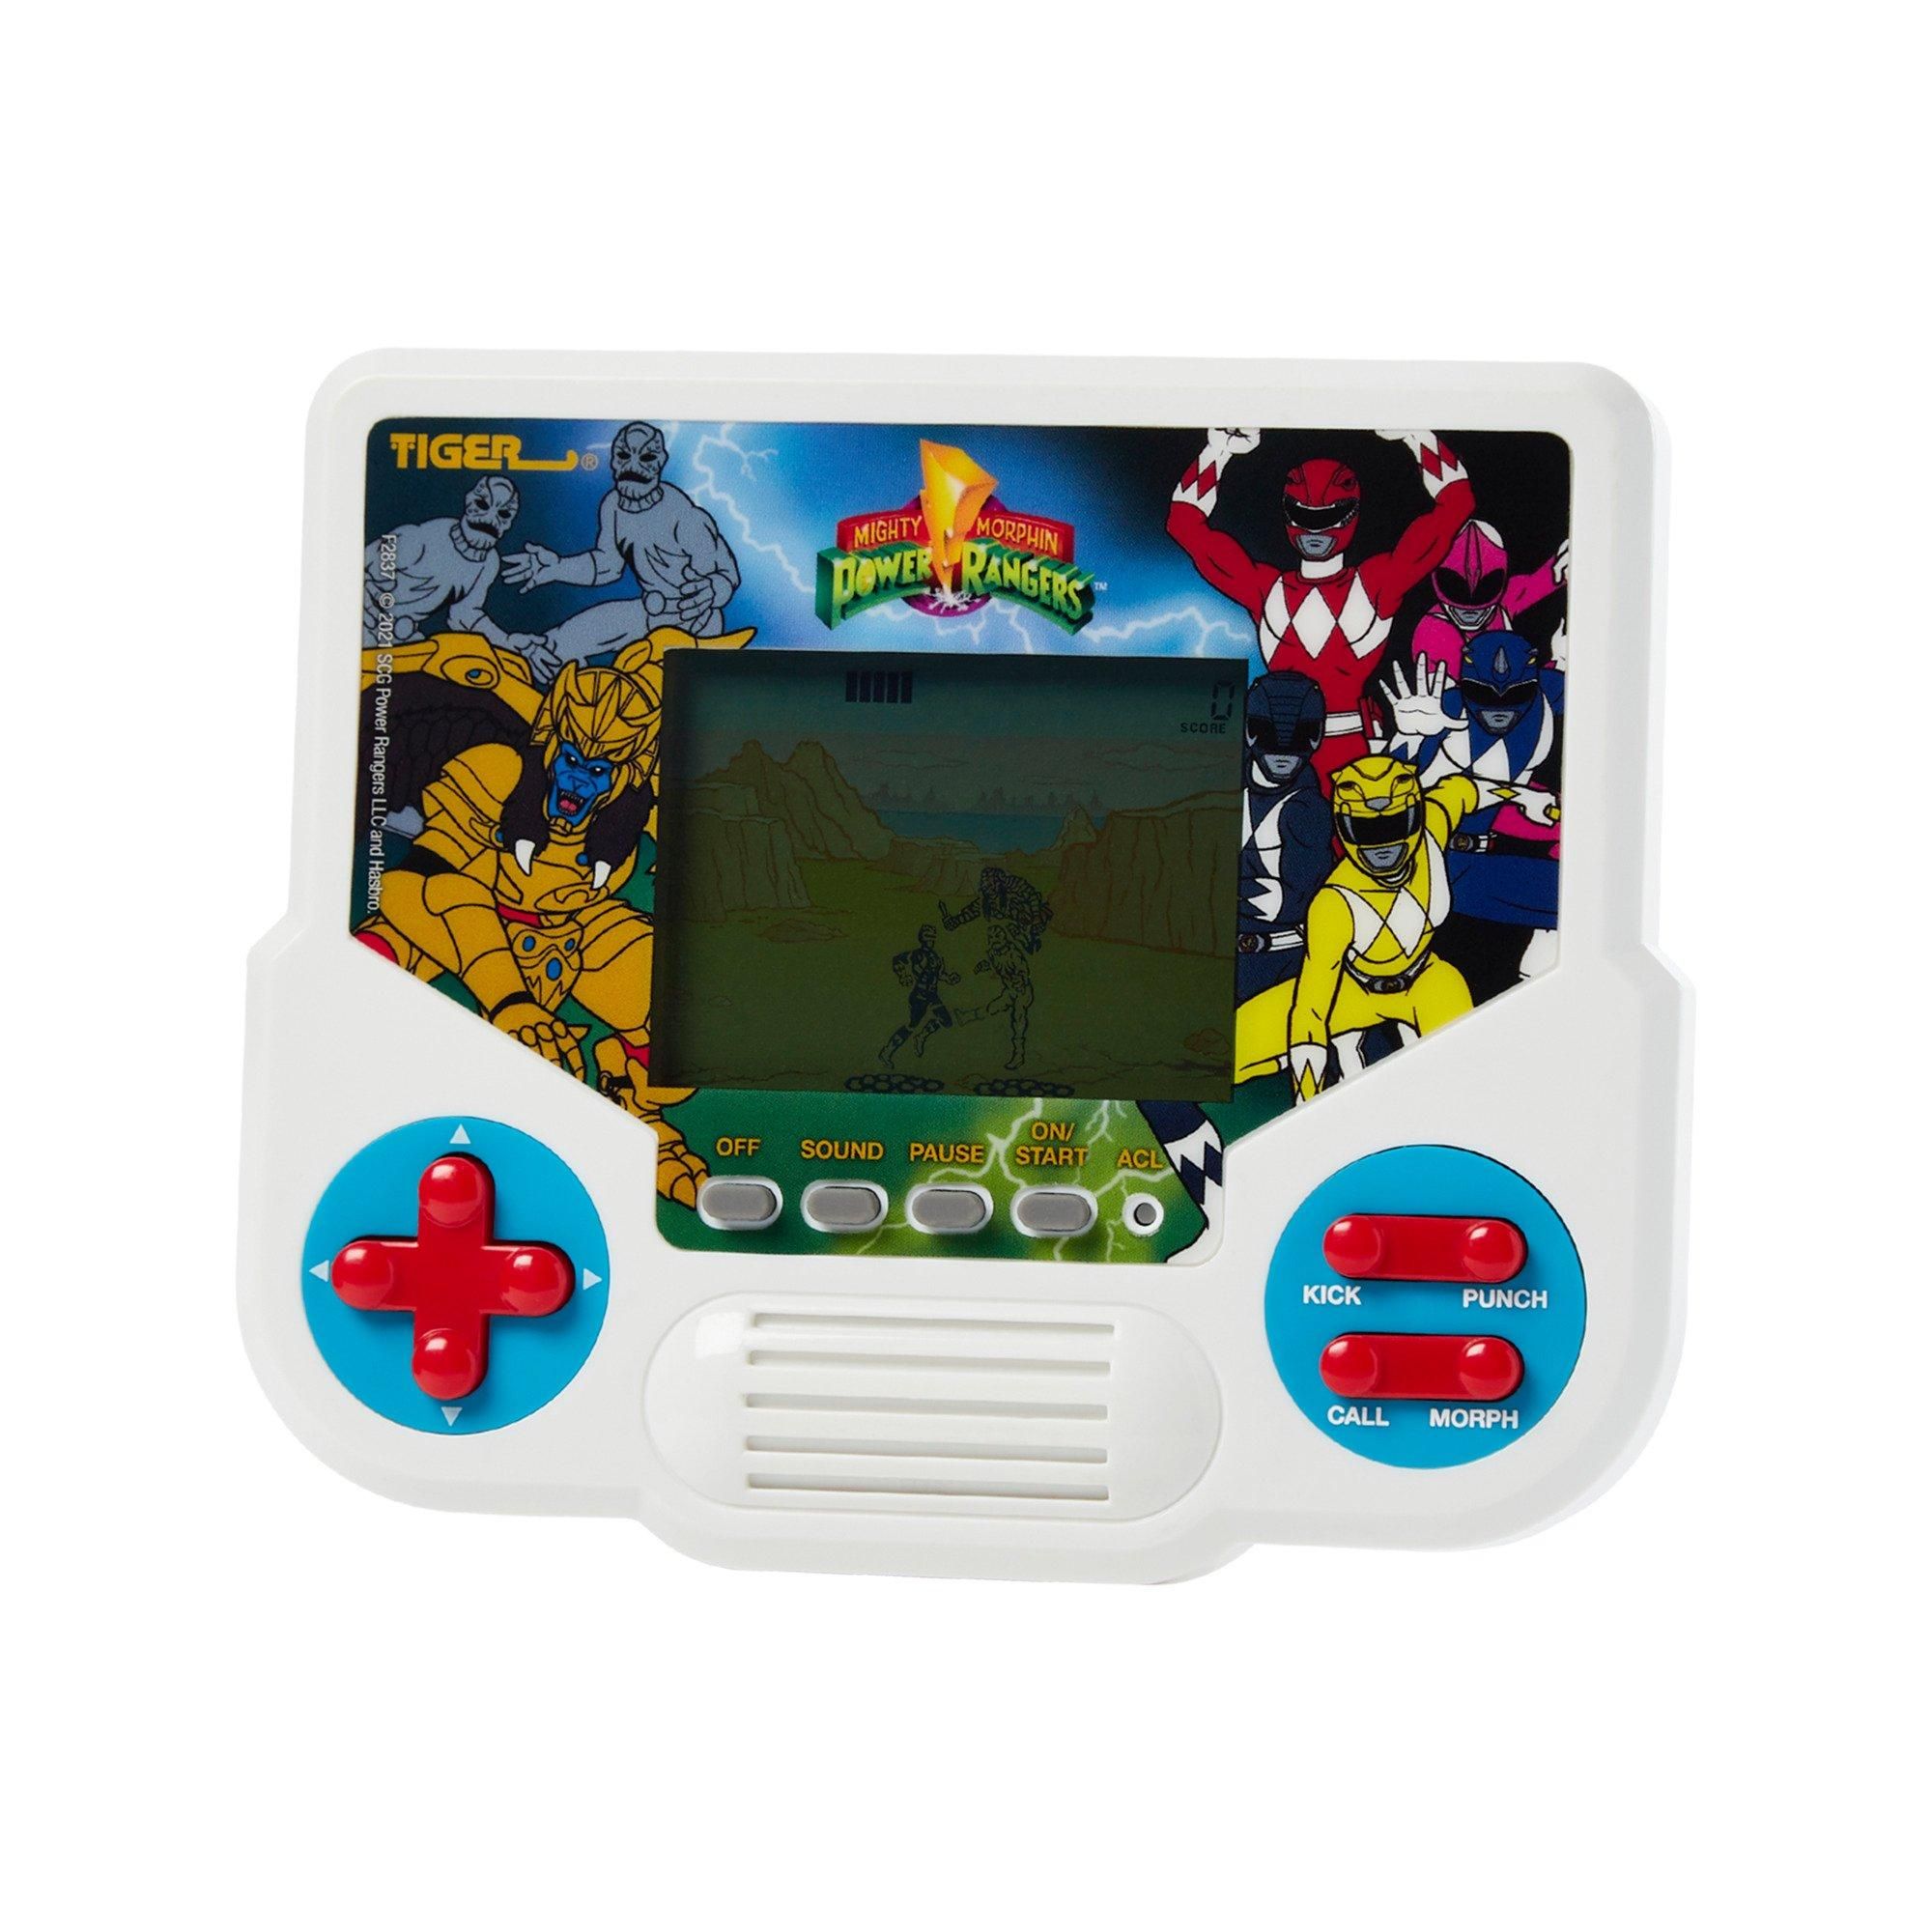 Mighty-Morphin-Power-Rangers-Tiger-Electronic-Game-1